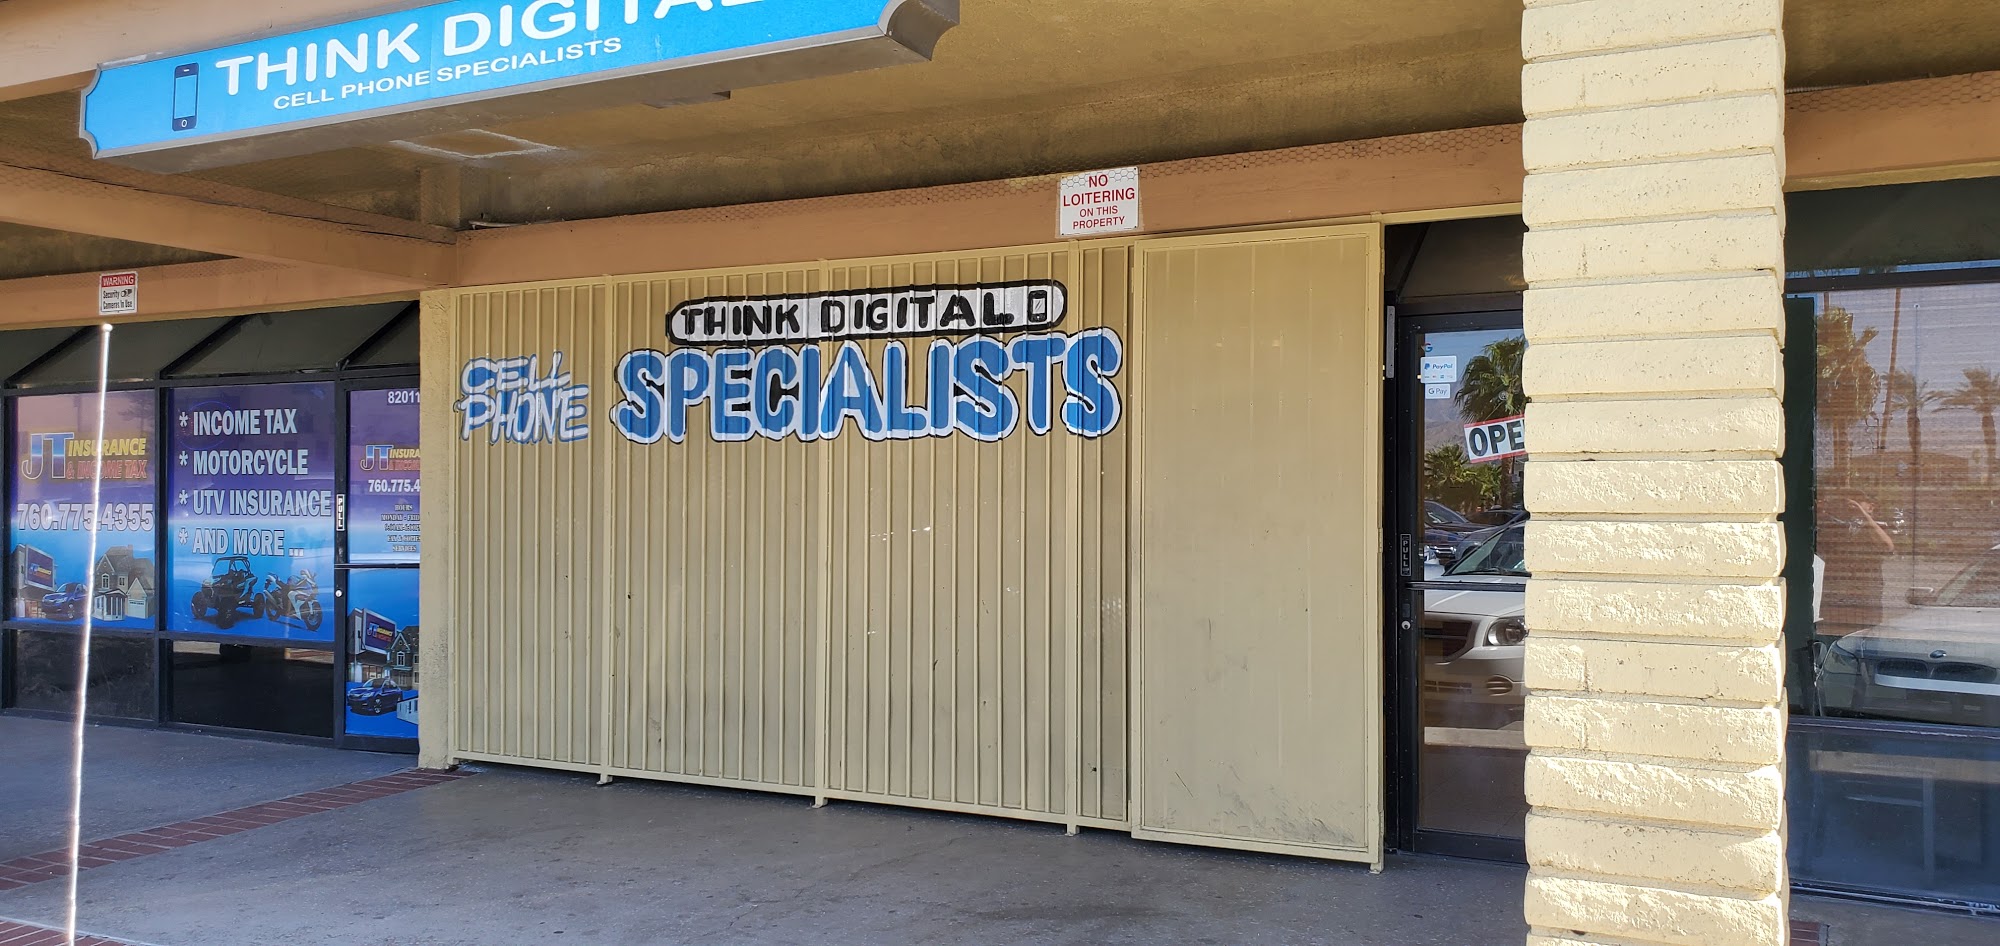 Think Digital-Cell Phone Specialists